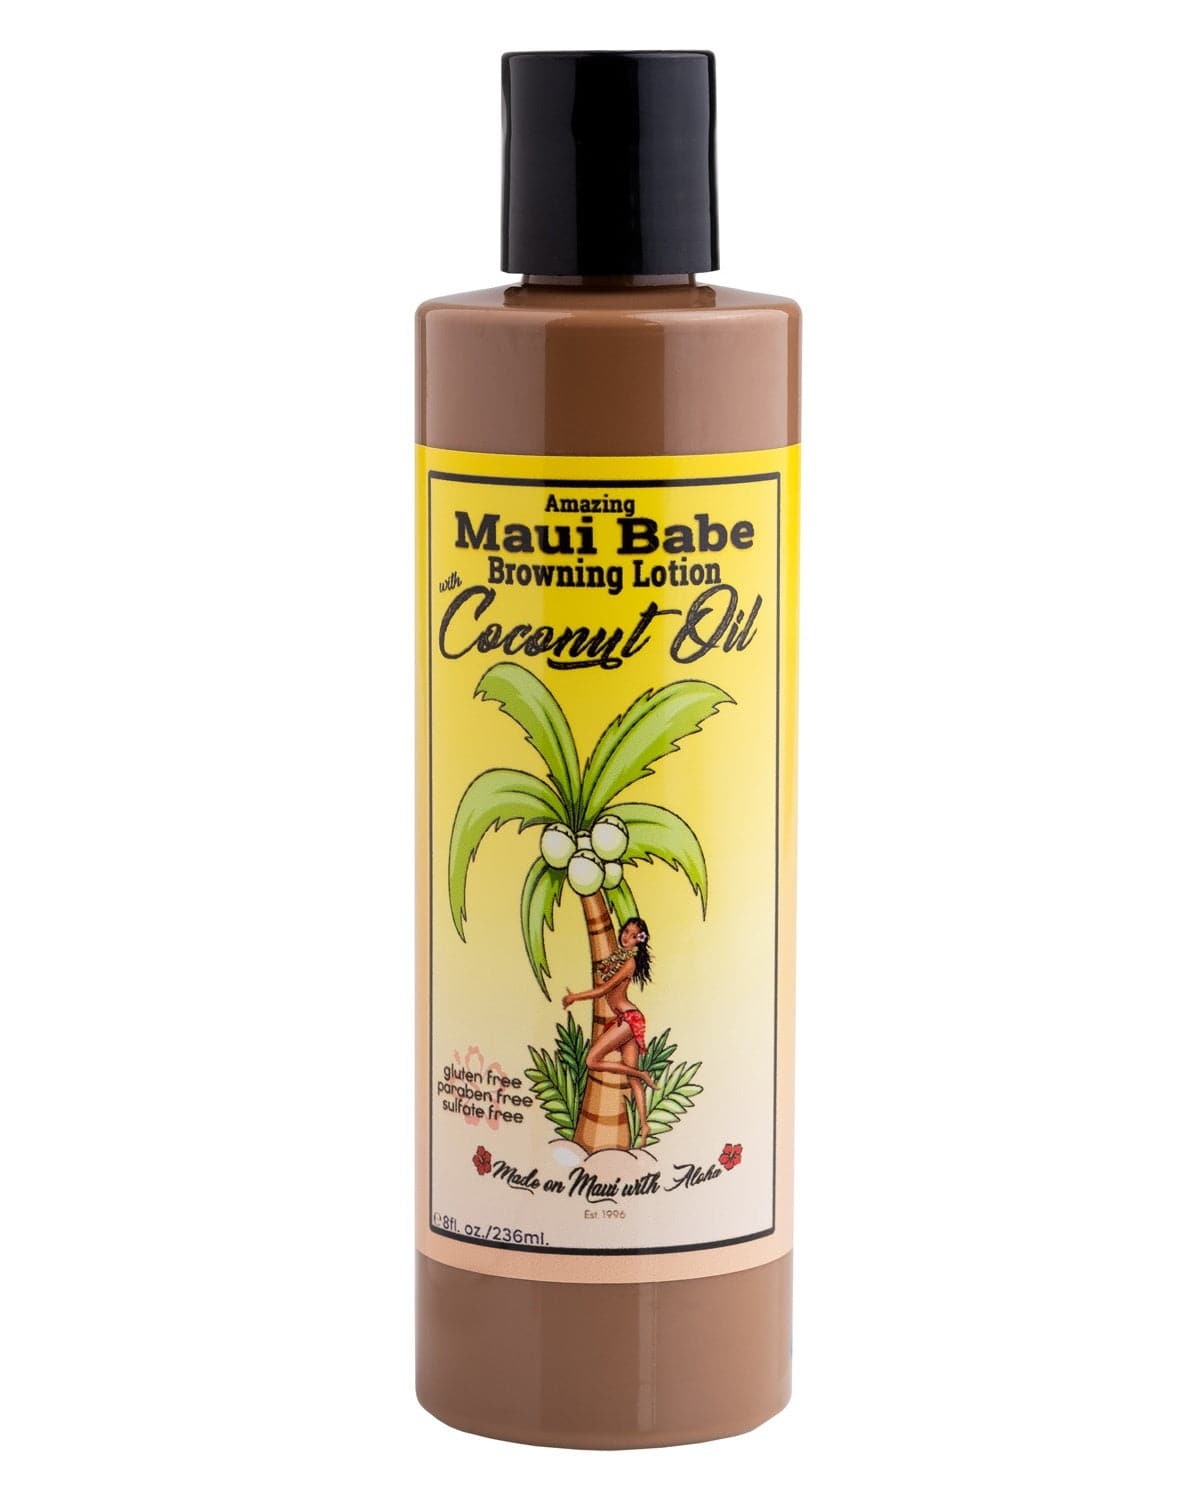 Browning Lotion with Coconut Oil 236ml